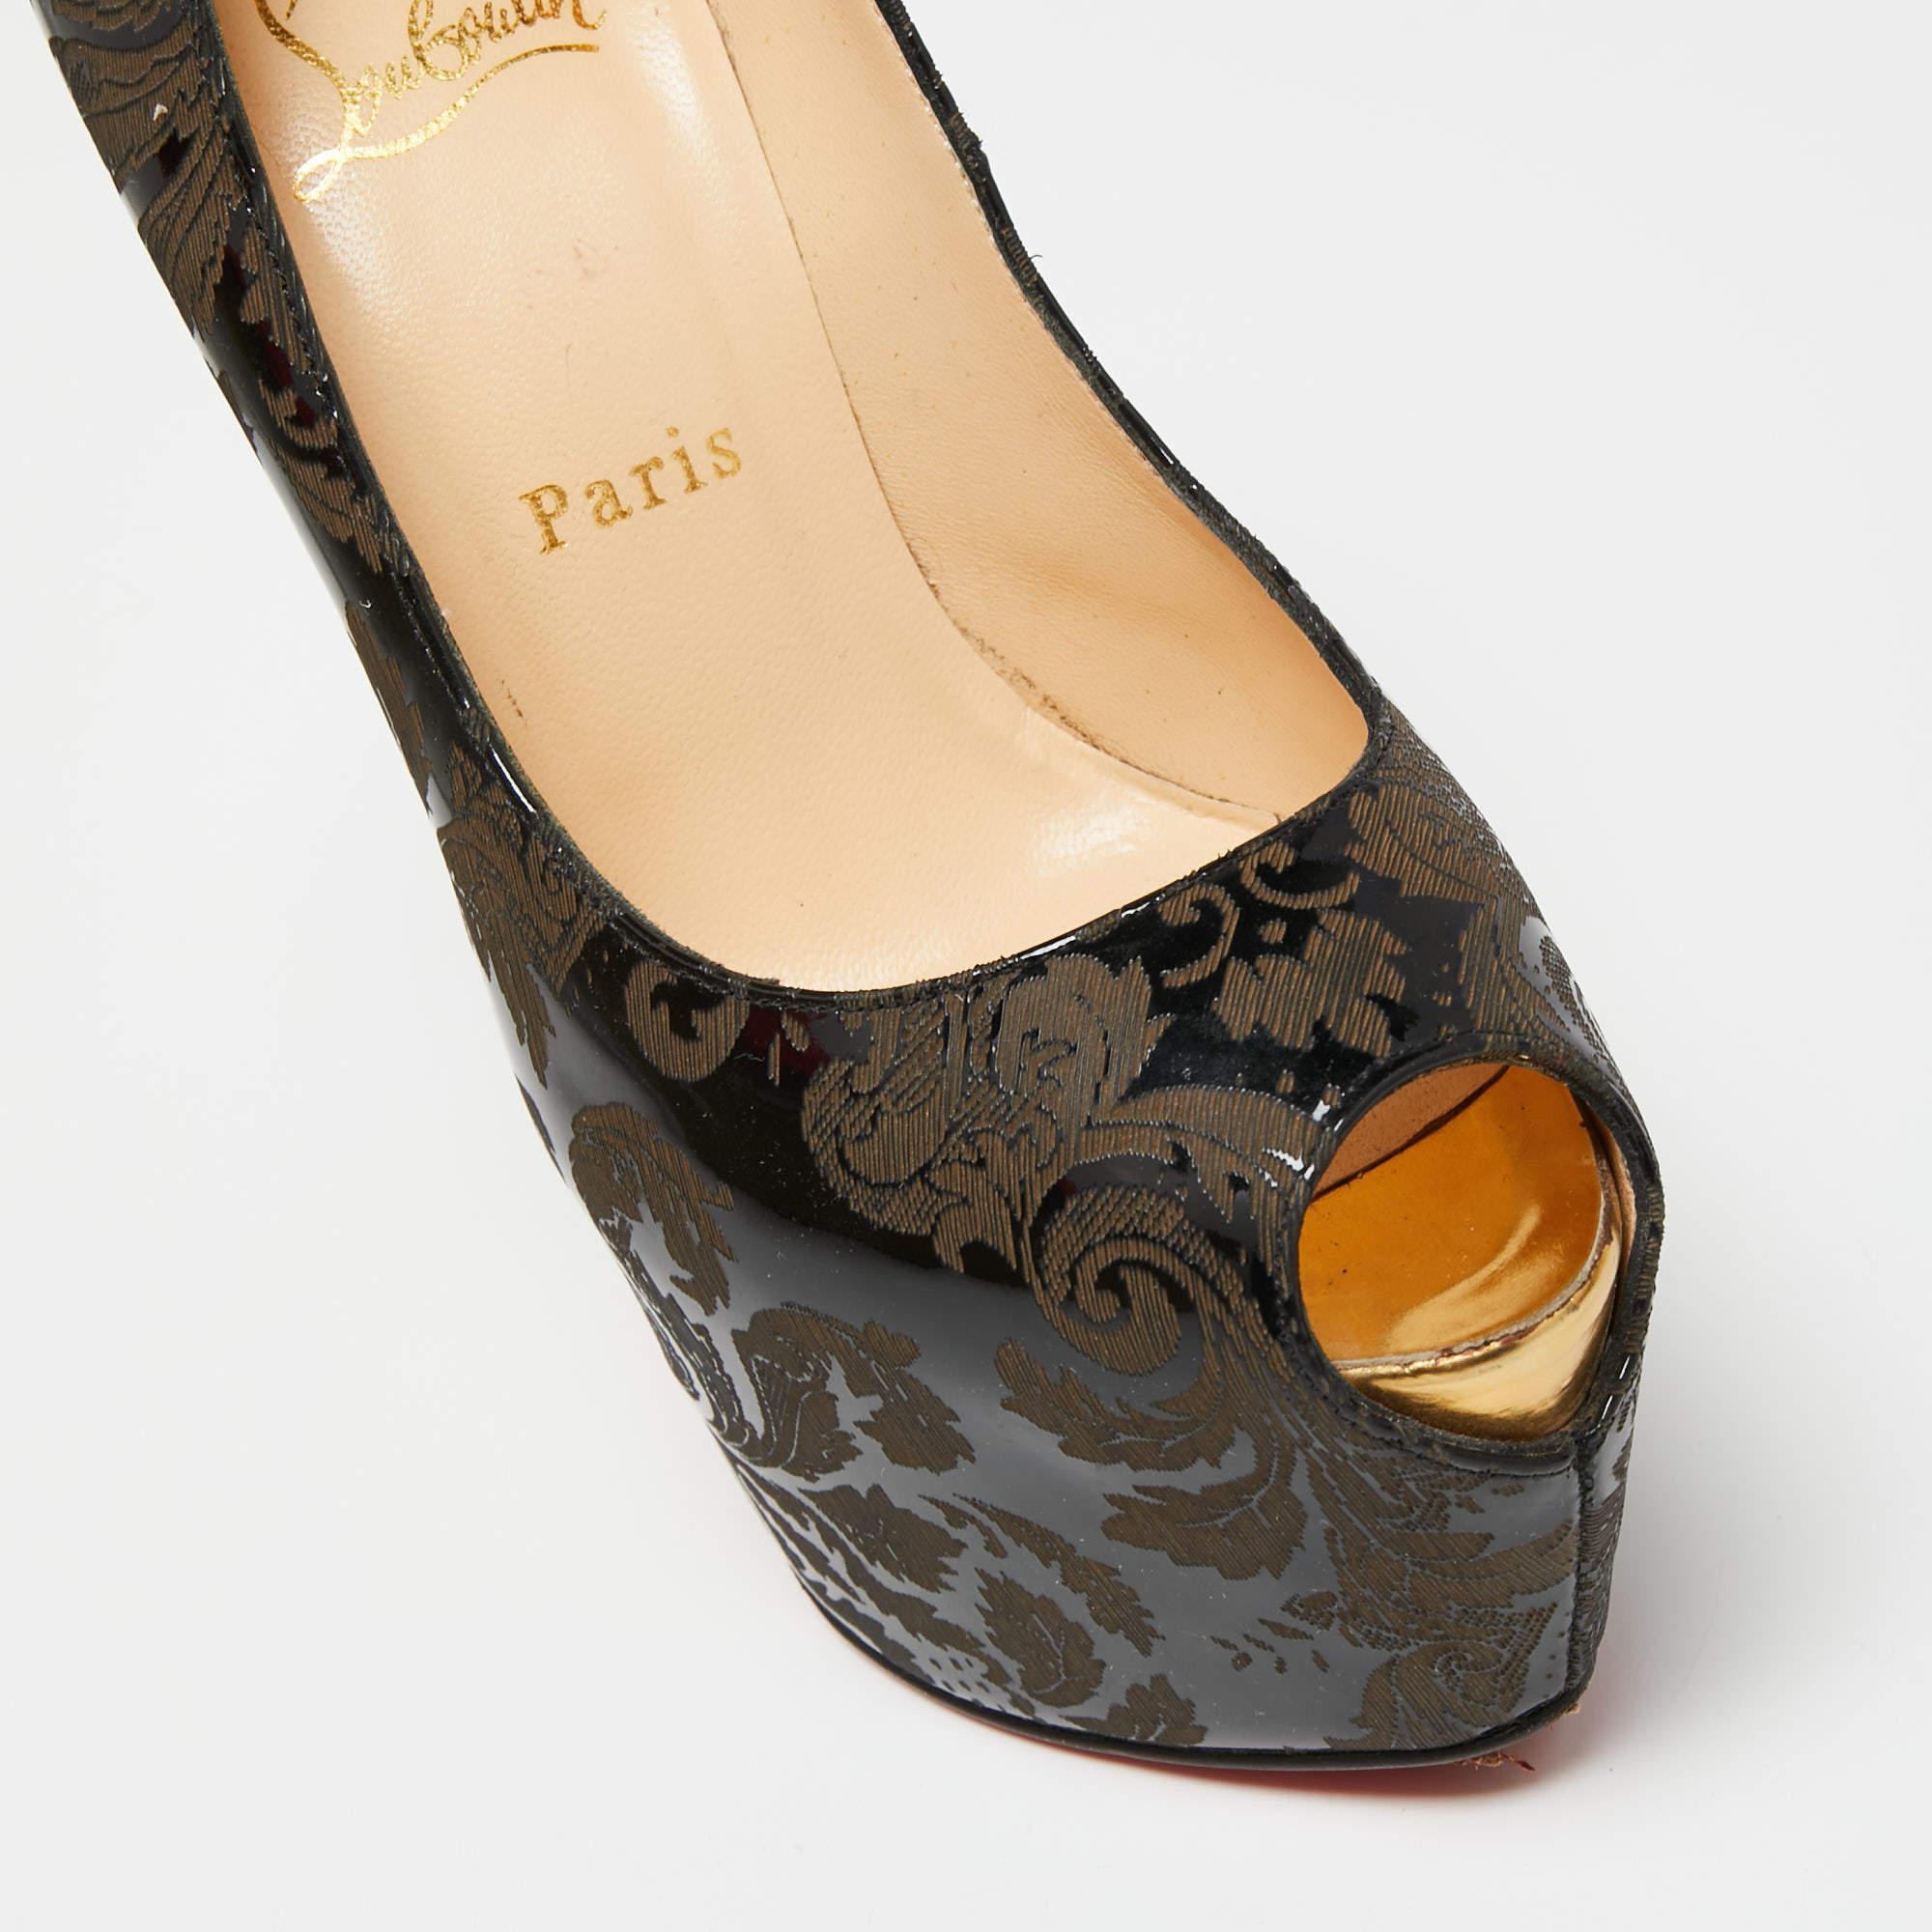 Christian Louboutin Black/Brown Patent Leather Arabesque Highness Peep-Toe Pumps For Sale 3